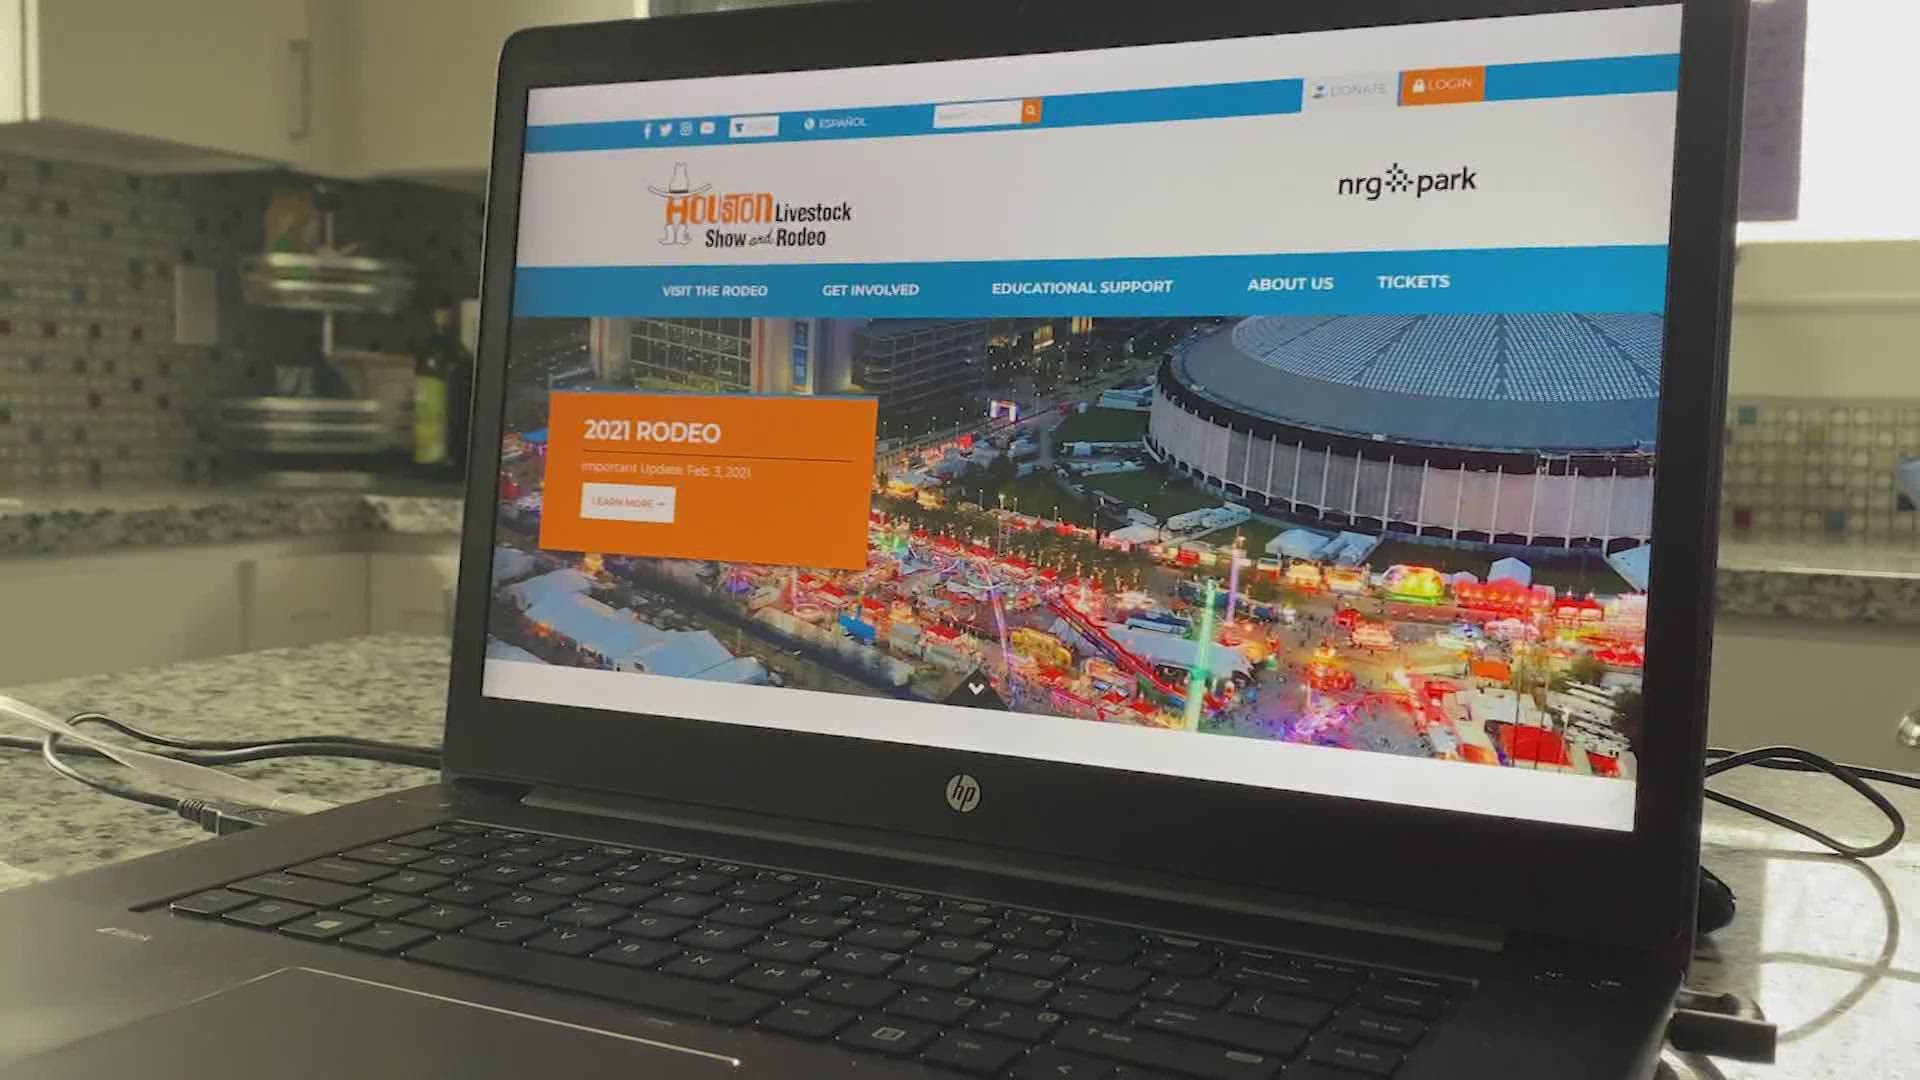 Last week, the Houston Livestock Show and Rodeo canceled this year's show but they're racing to create an online marketplace for about 350 vendors and sponsors.